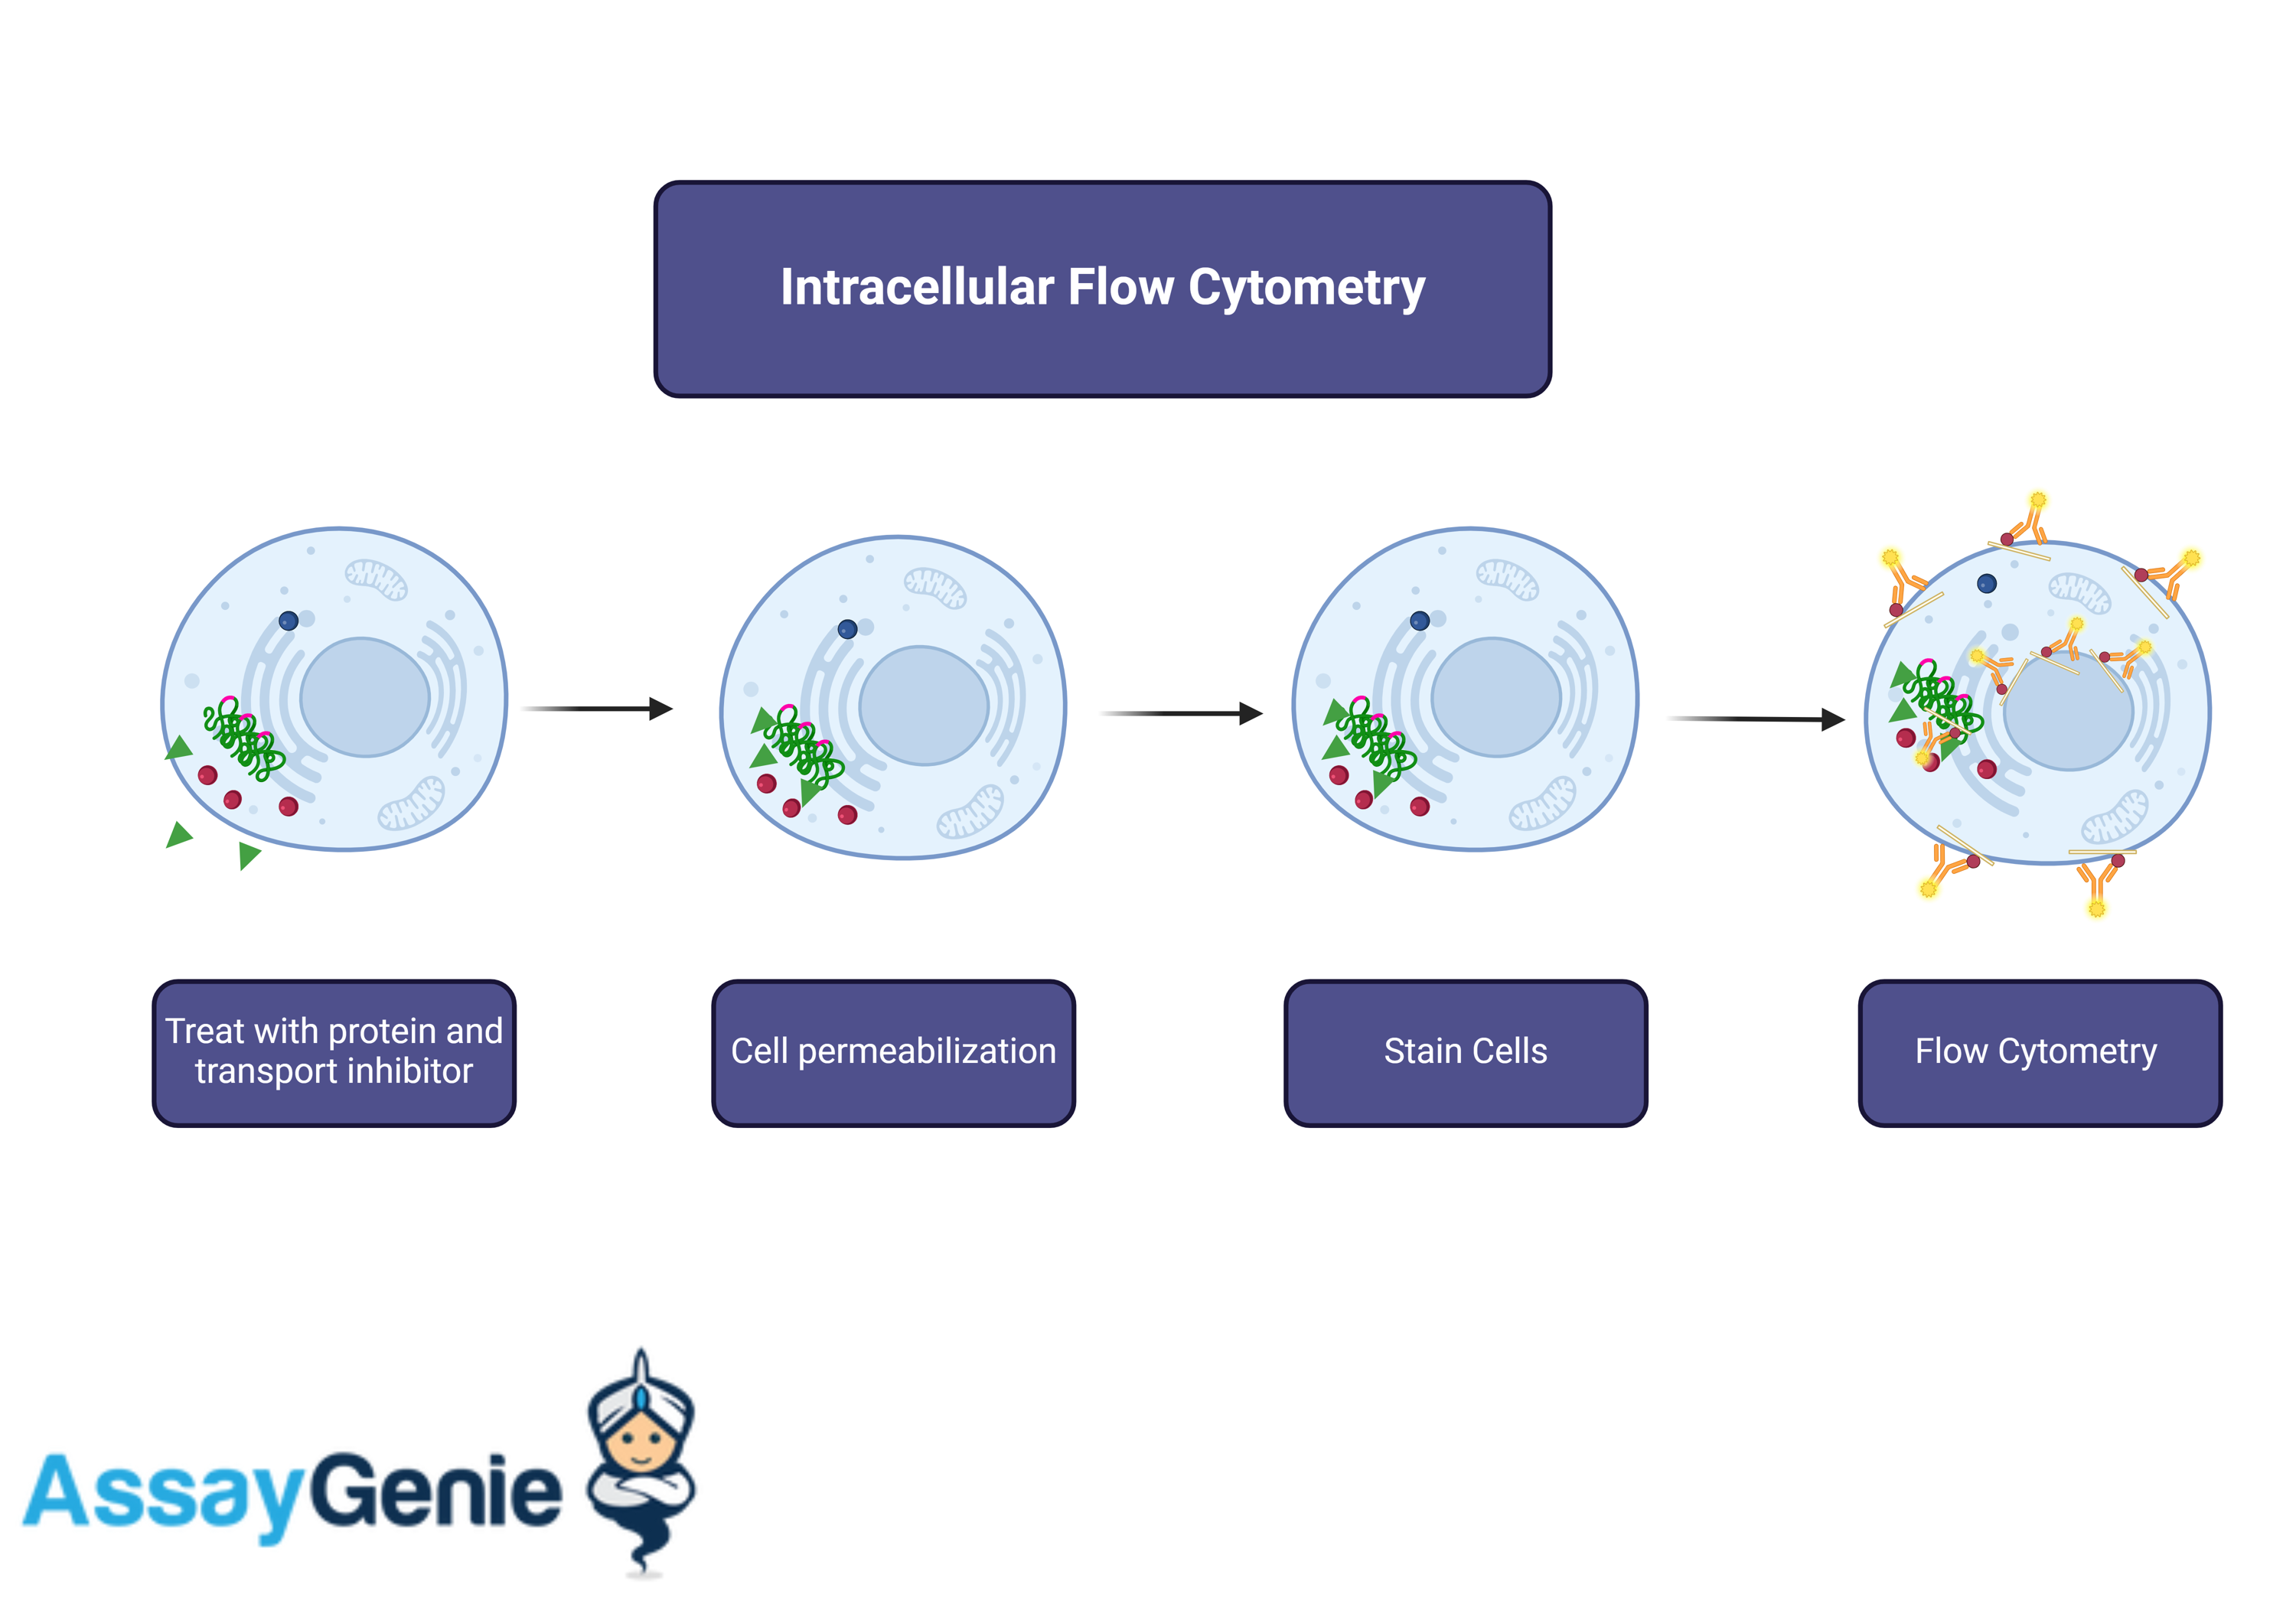 Intracellular flow cytometry